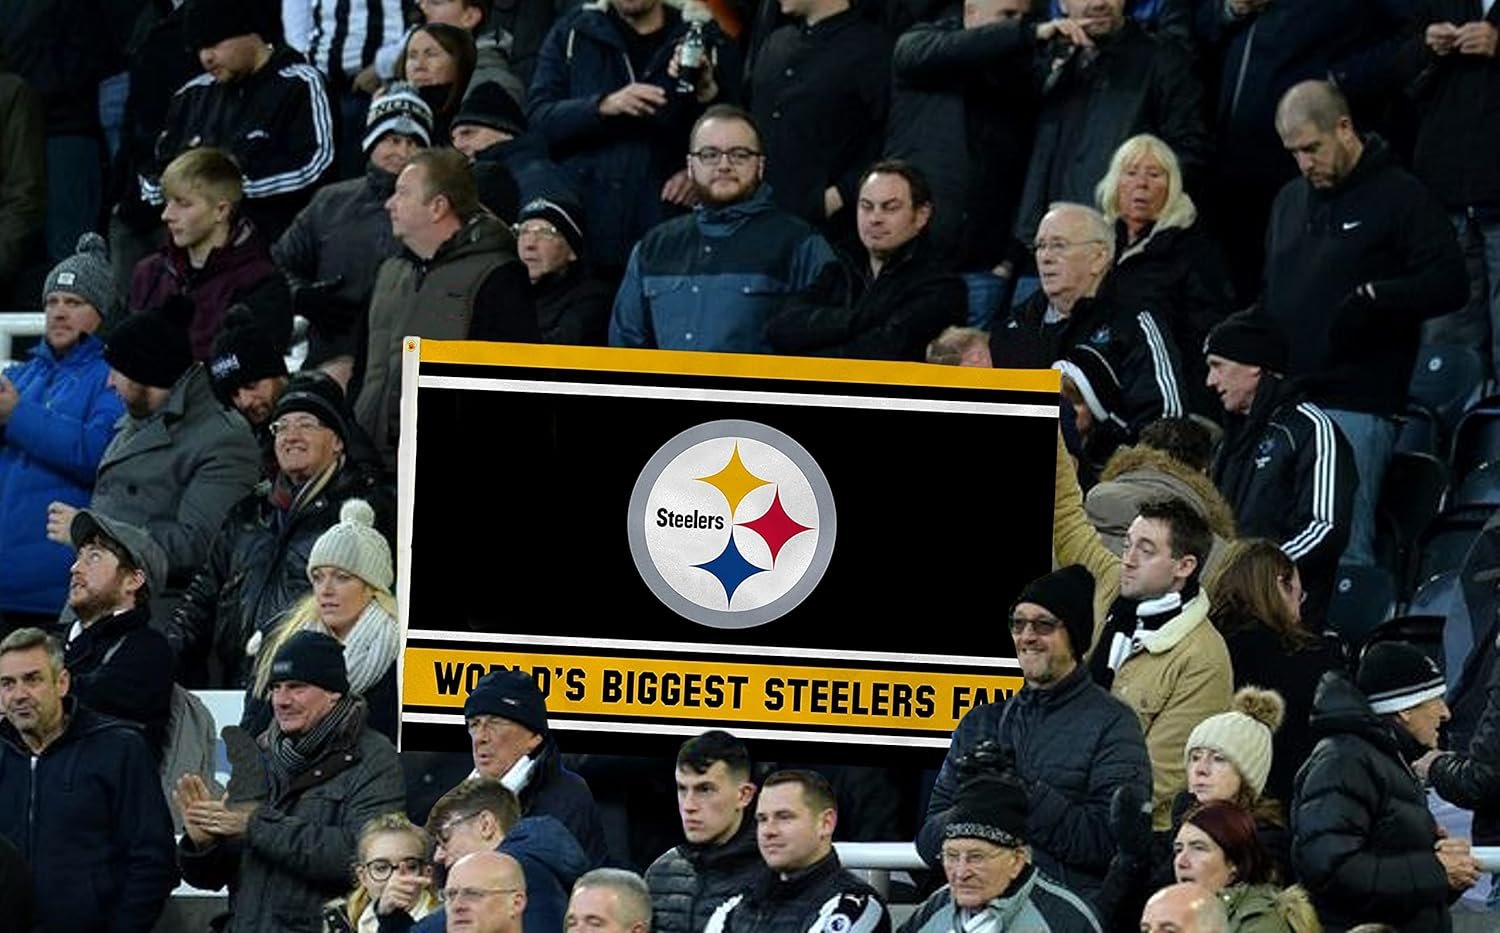 Pittsburgh Steelers 3x5 Feet Flag Banner, World's Biggest Fan, Metal Grommets, Single Sided, Indoor or Outdoor Use